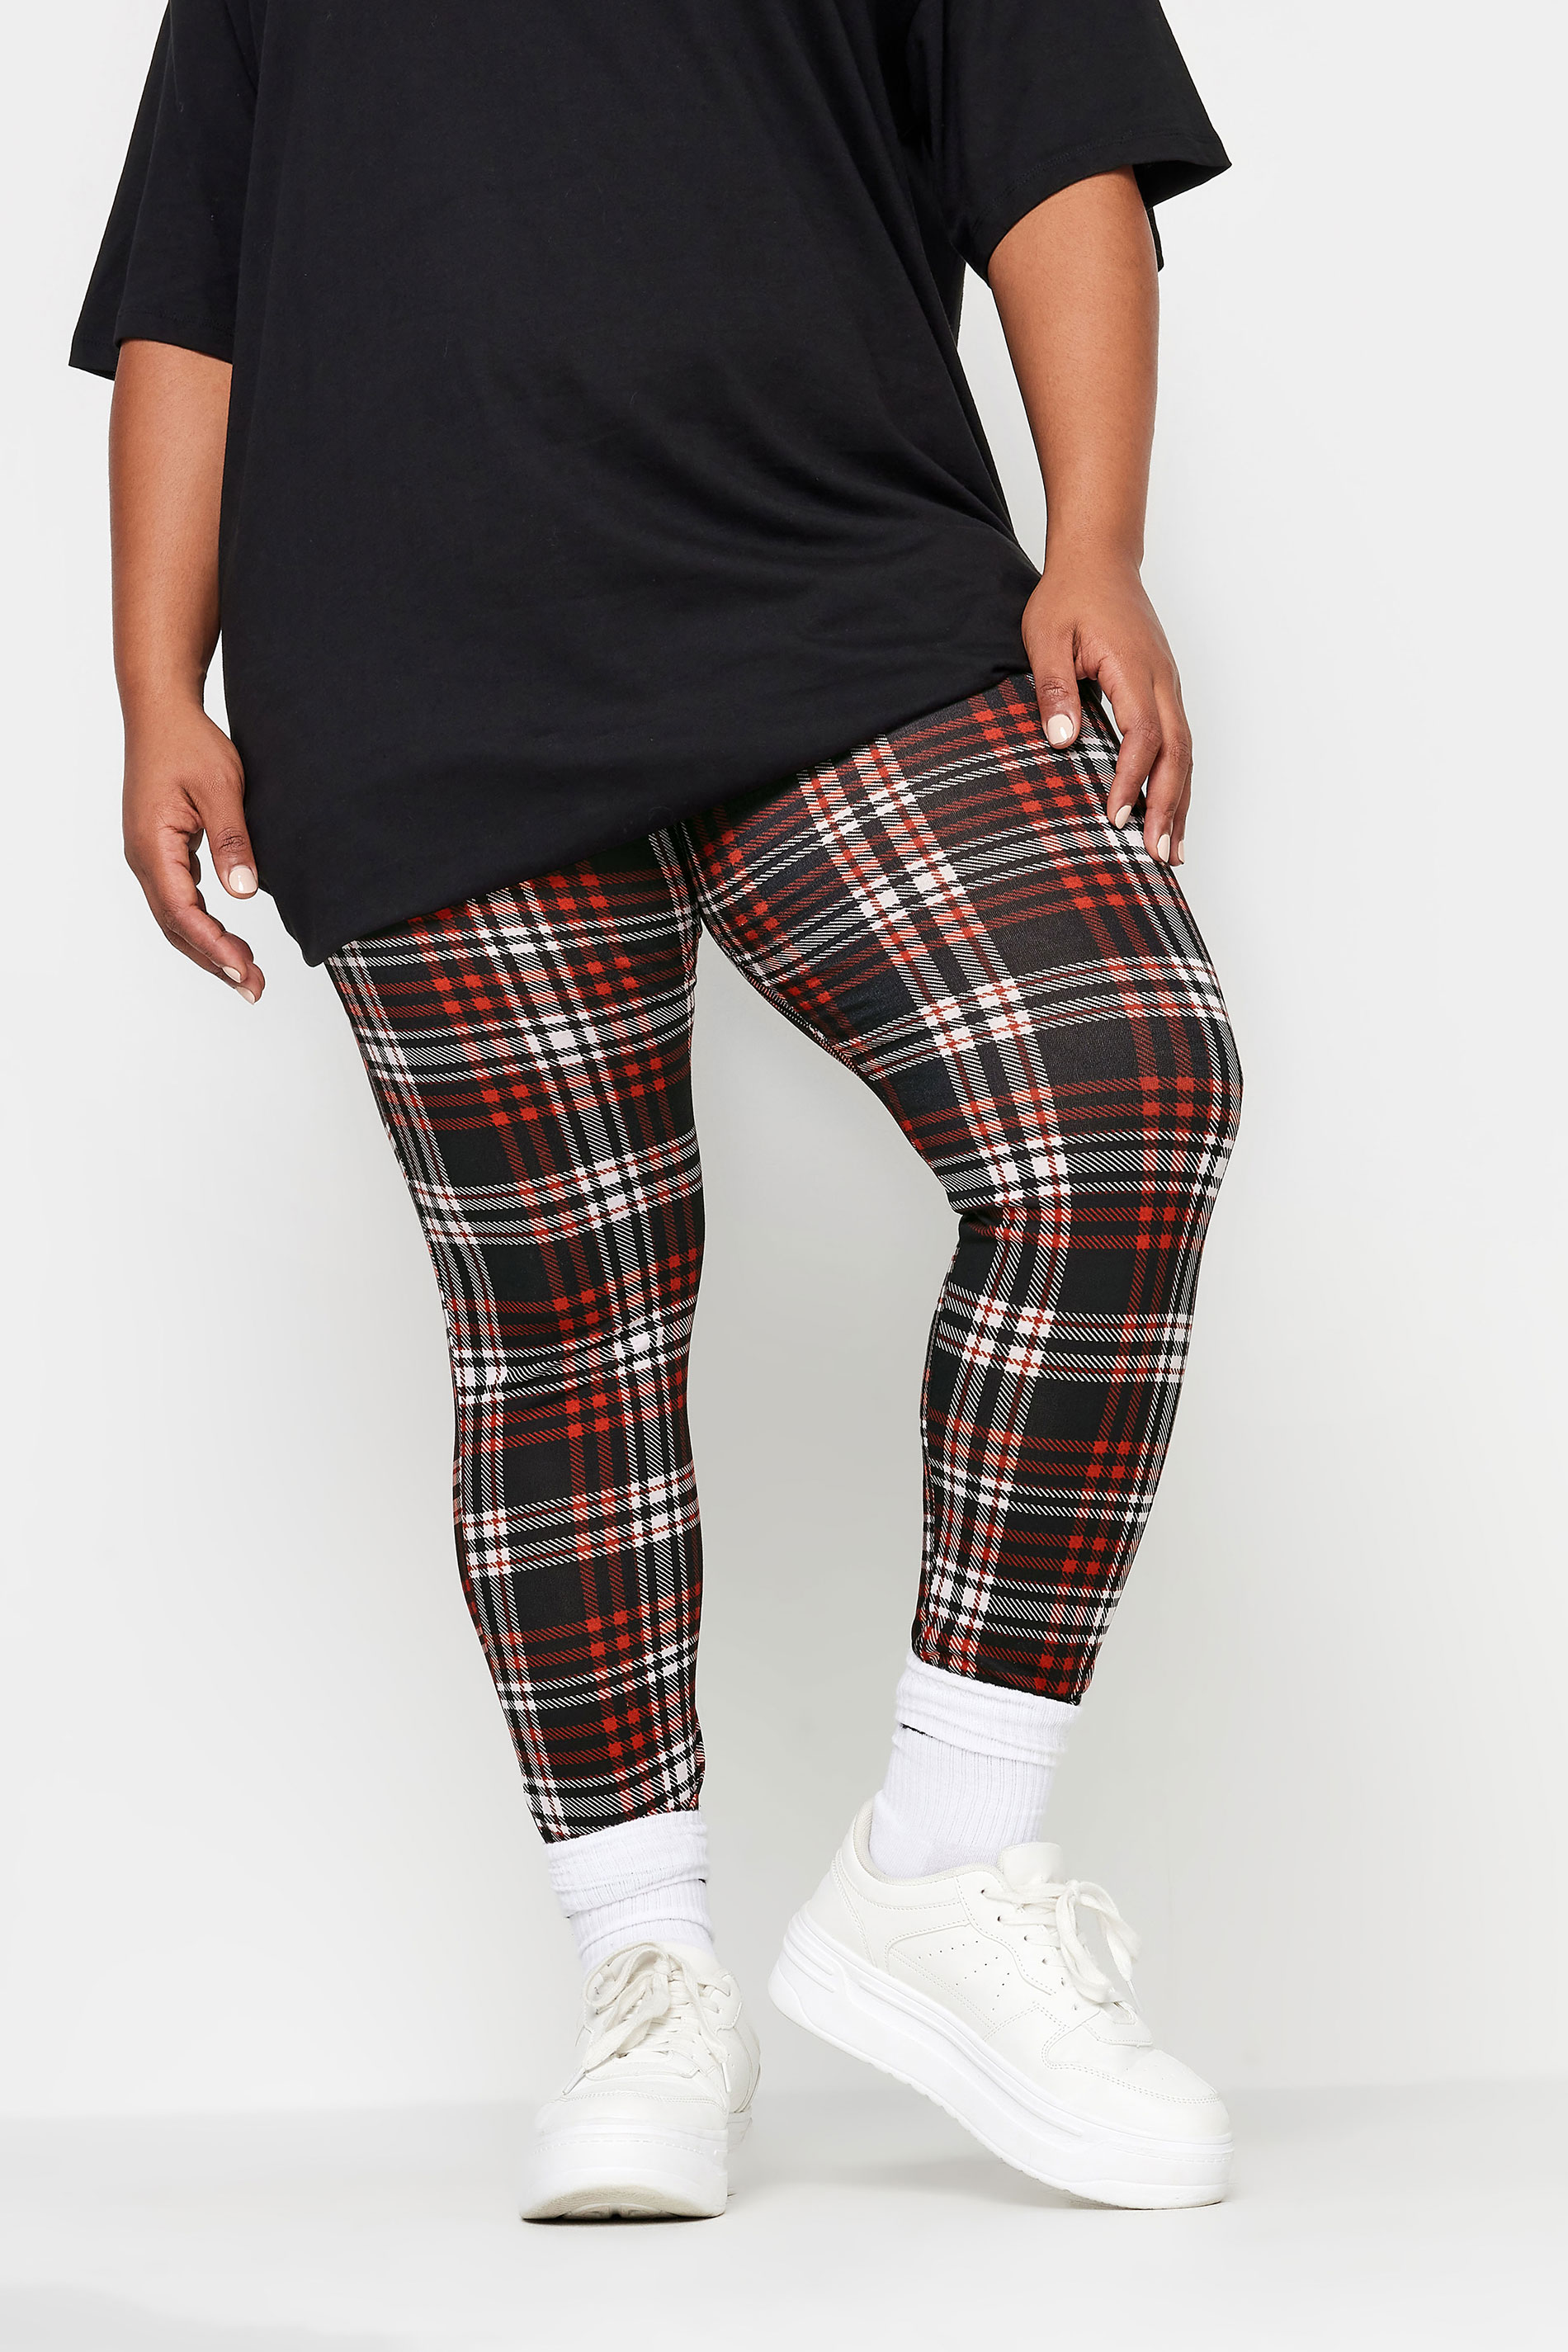 YOURS Plus Size Black & Red Check Print Leggings | Yours Clothing 1